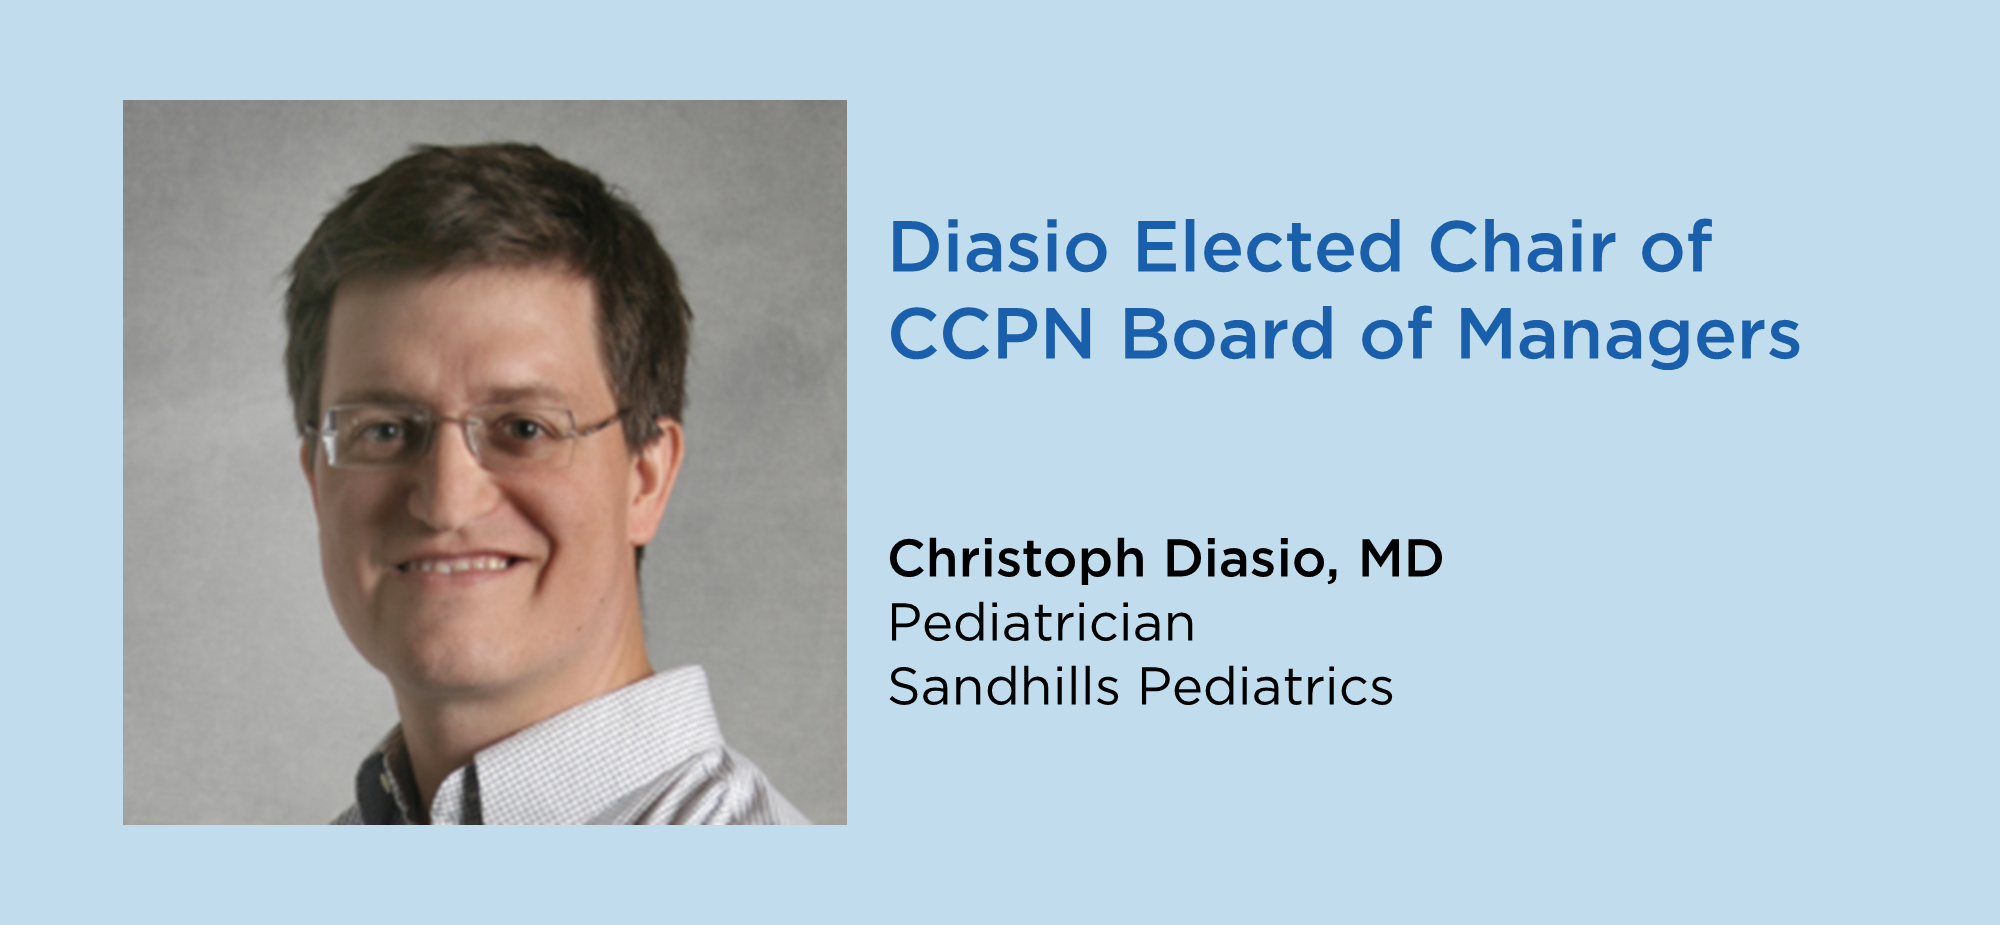 Diasio Elected Chair of CCPN Board of Managers